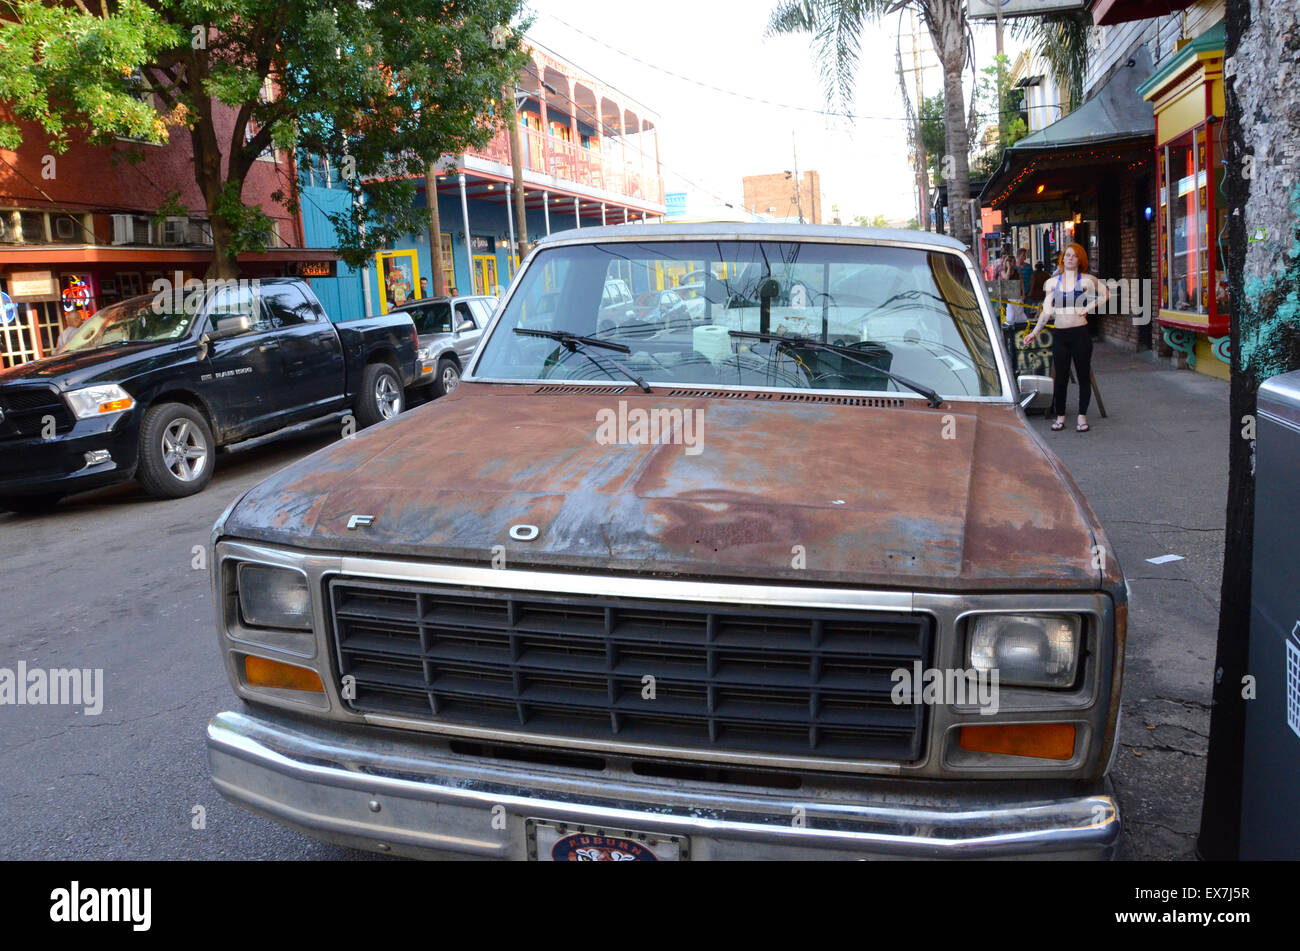 Rusty ford new orleans francese street Foto Stock